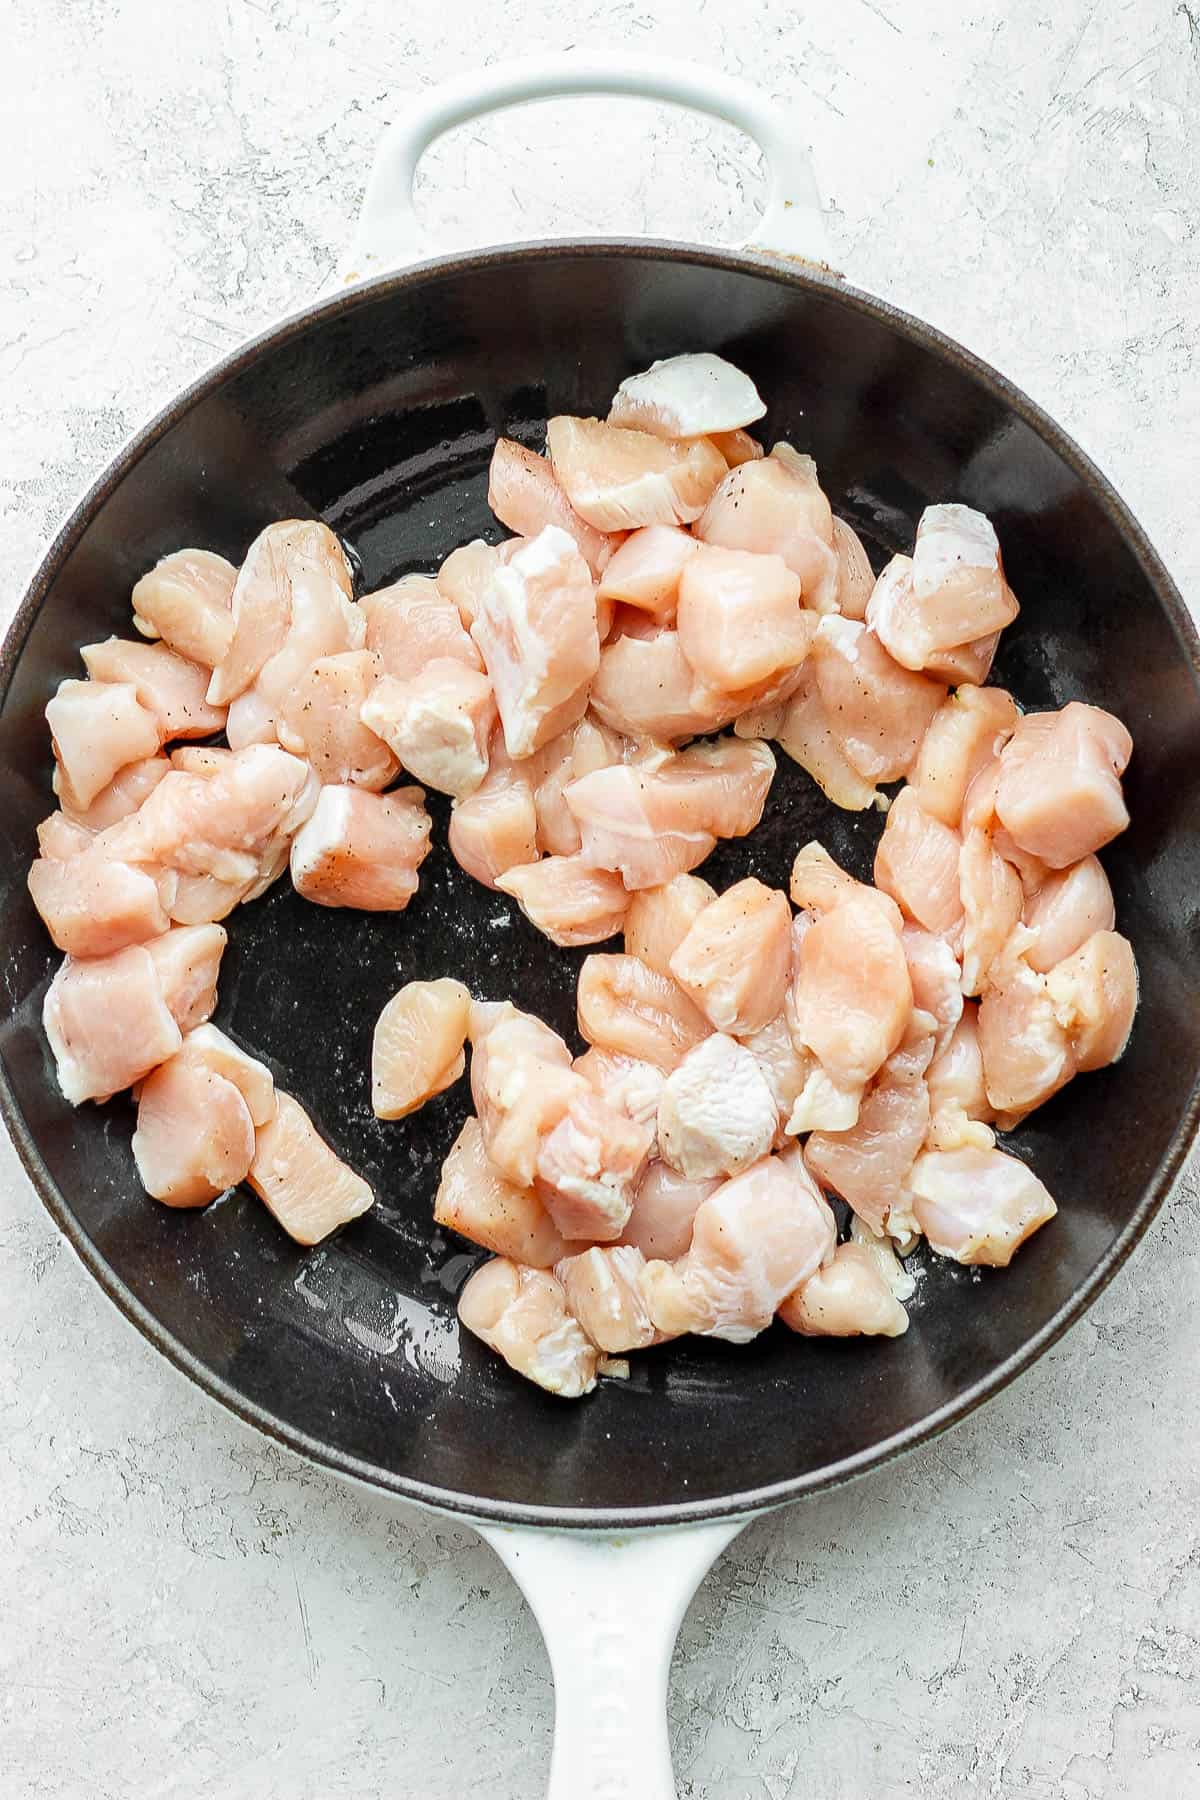 Chunks of raw chicken in a skillet.